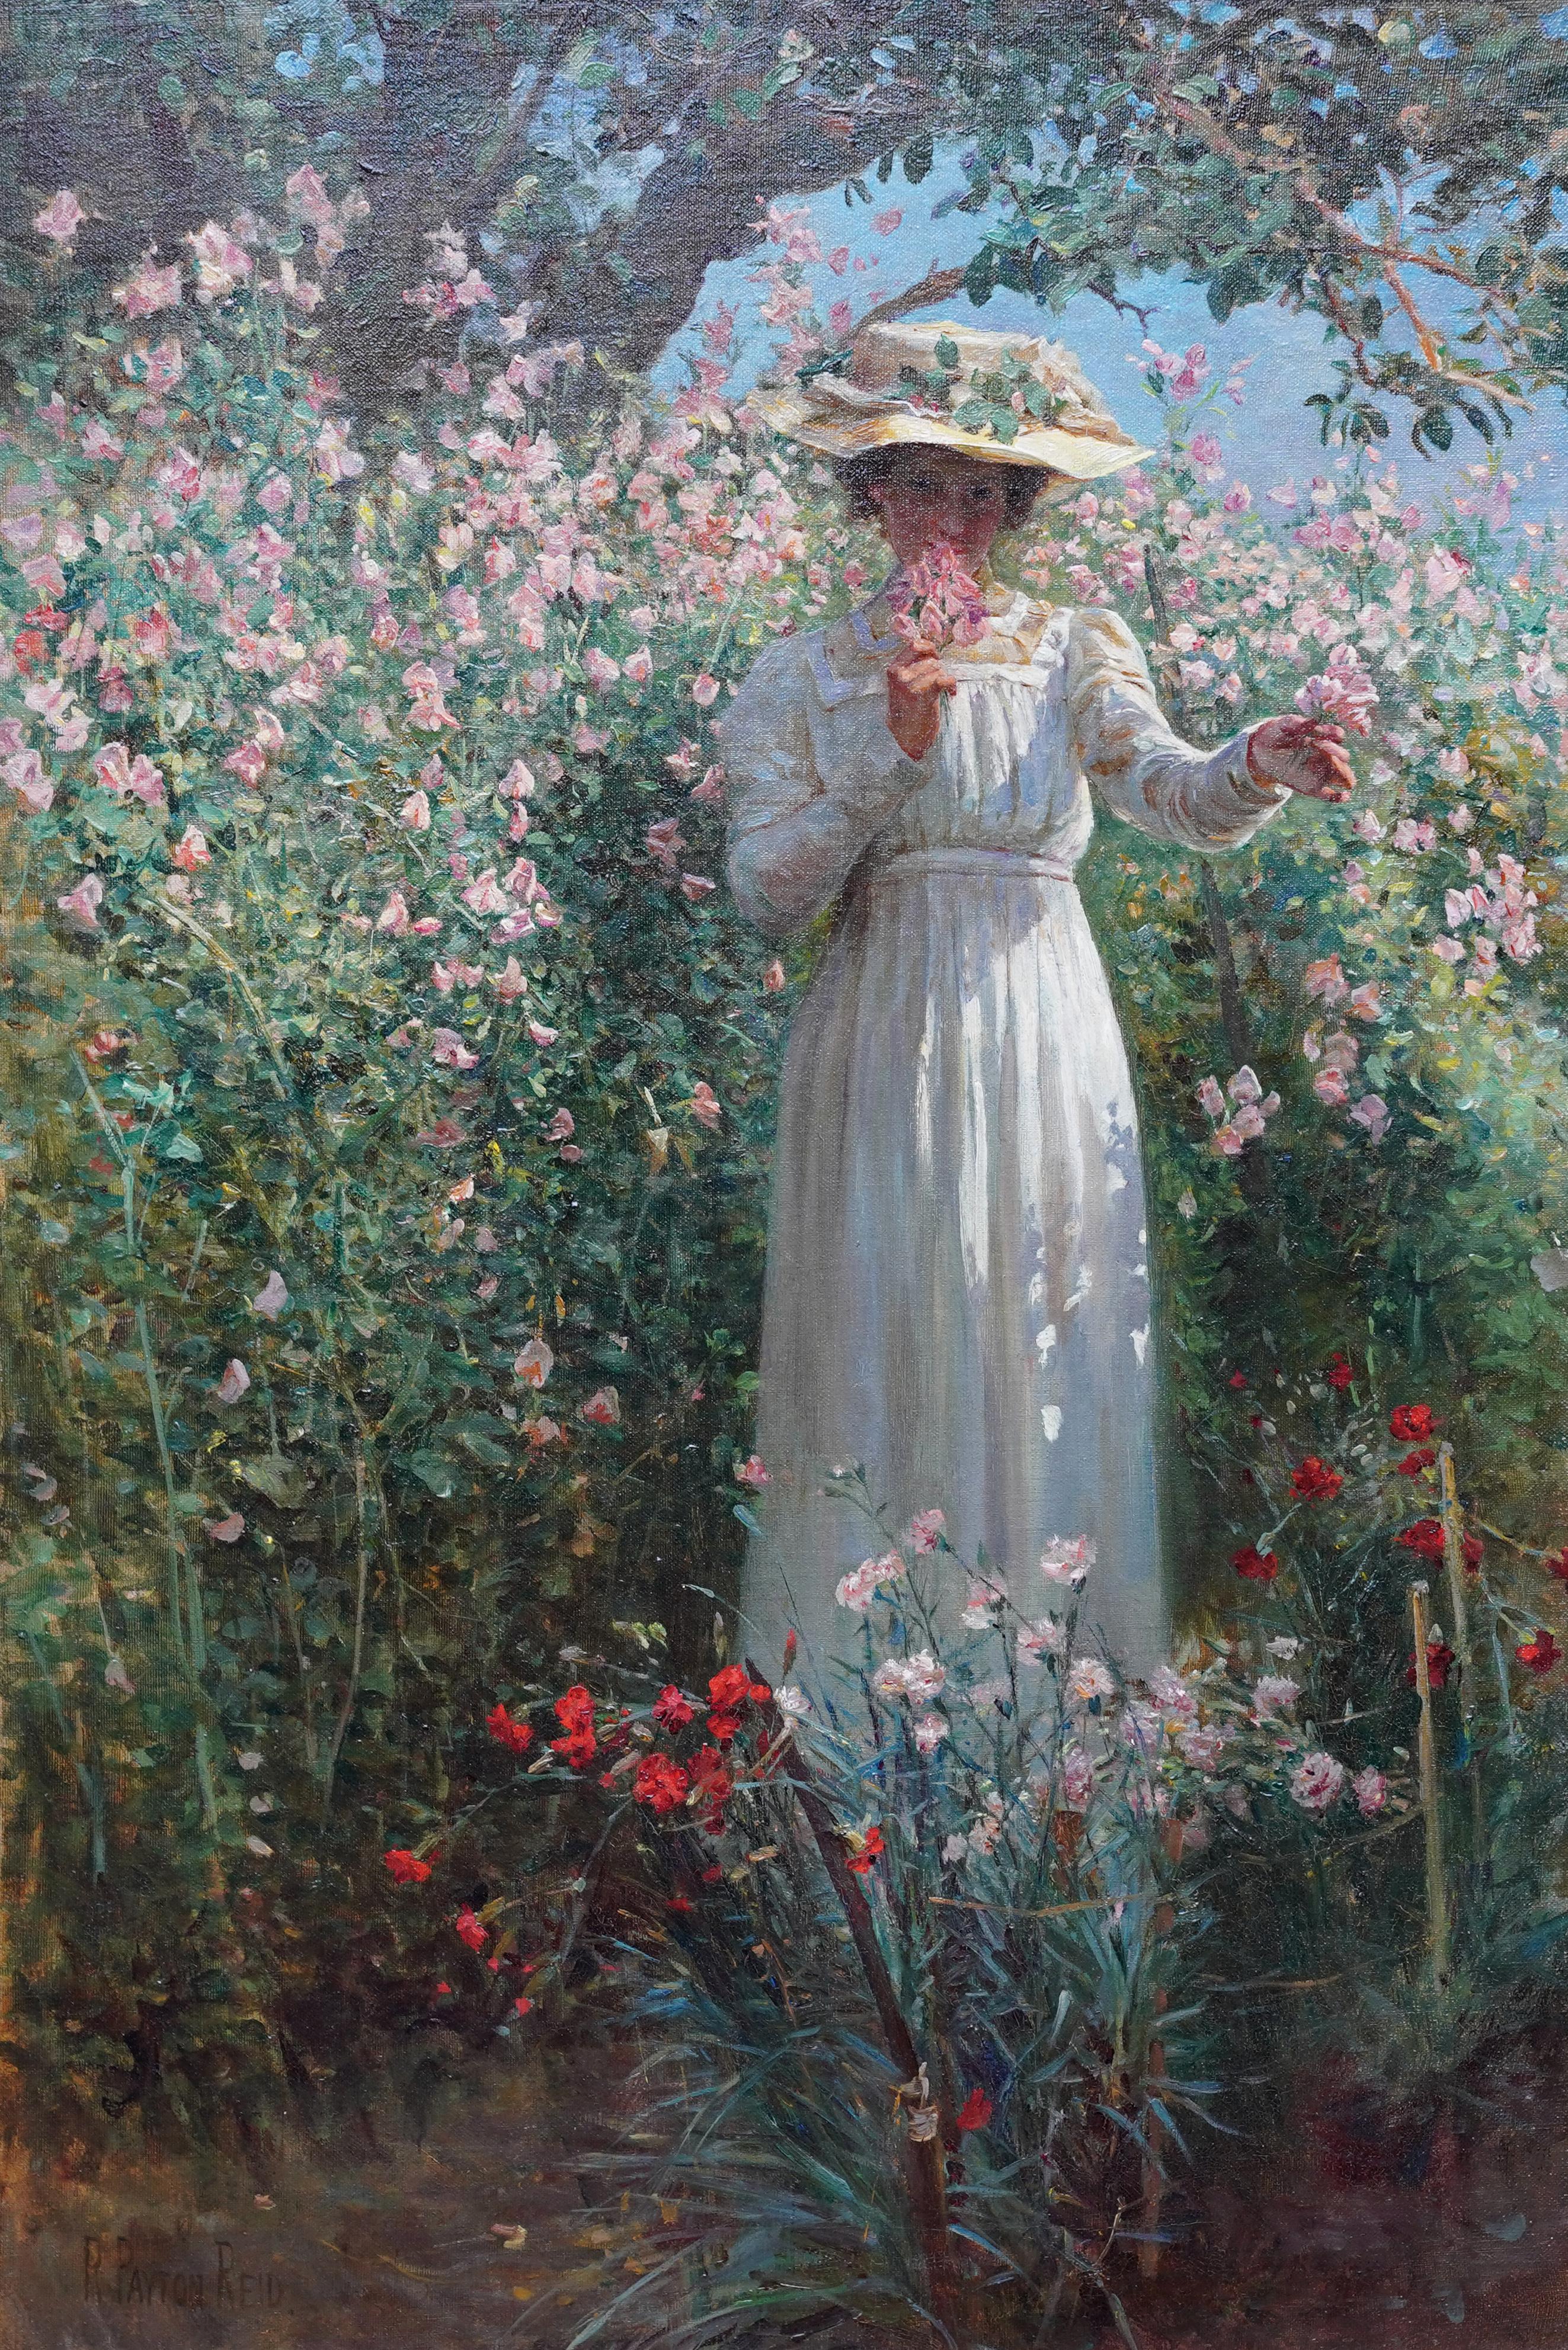 Portrait of a Lady with Sweet Peas - Scottish Edwardian exhib art oil painting - Painting by Robert Payton Reid